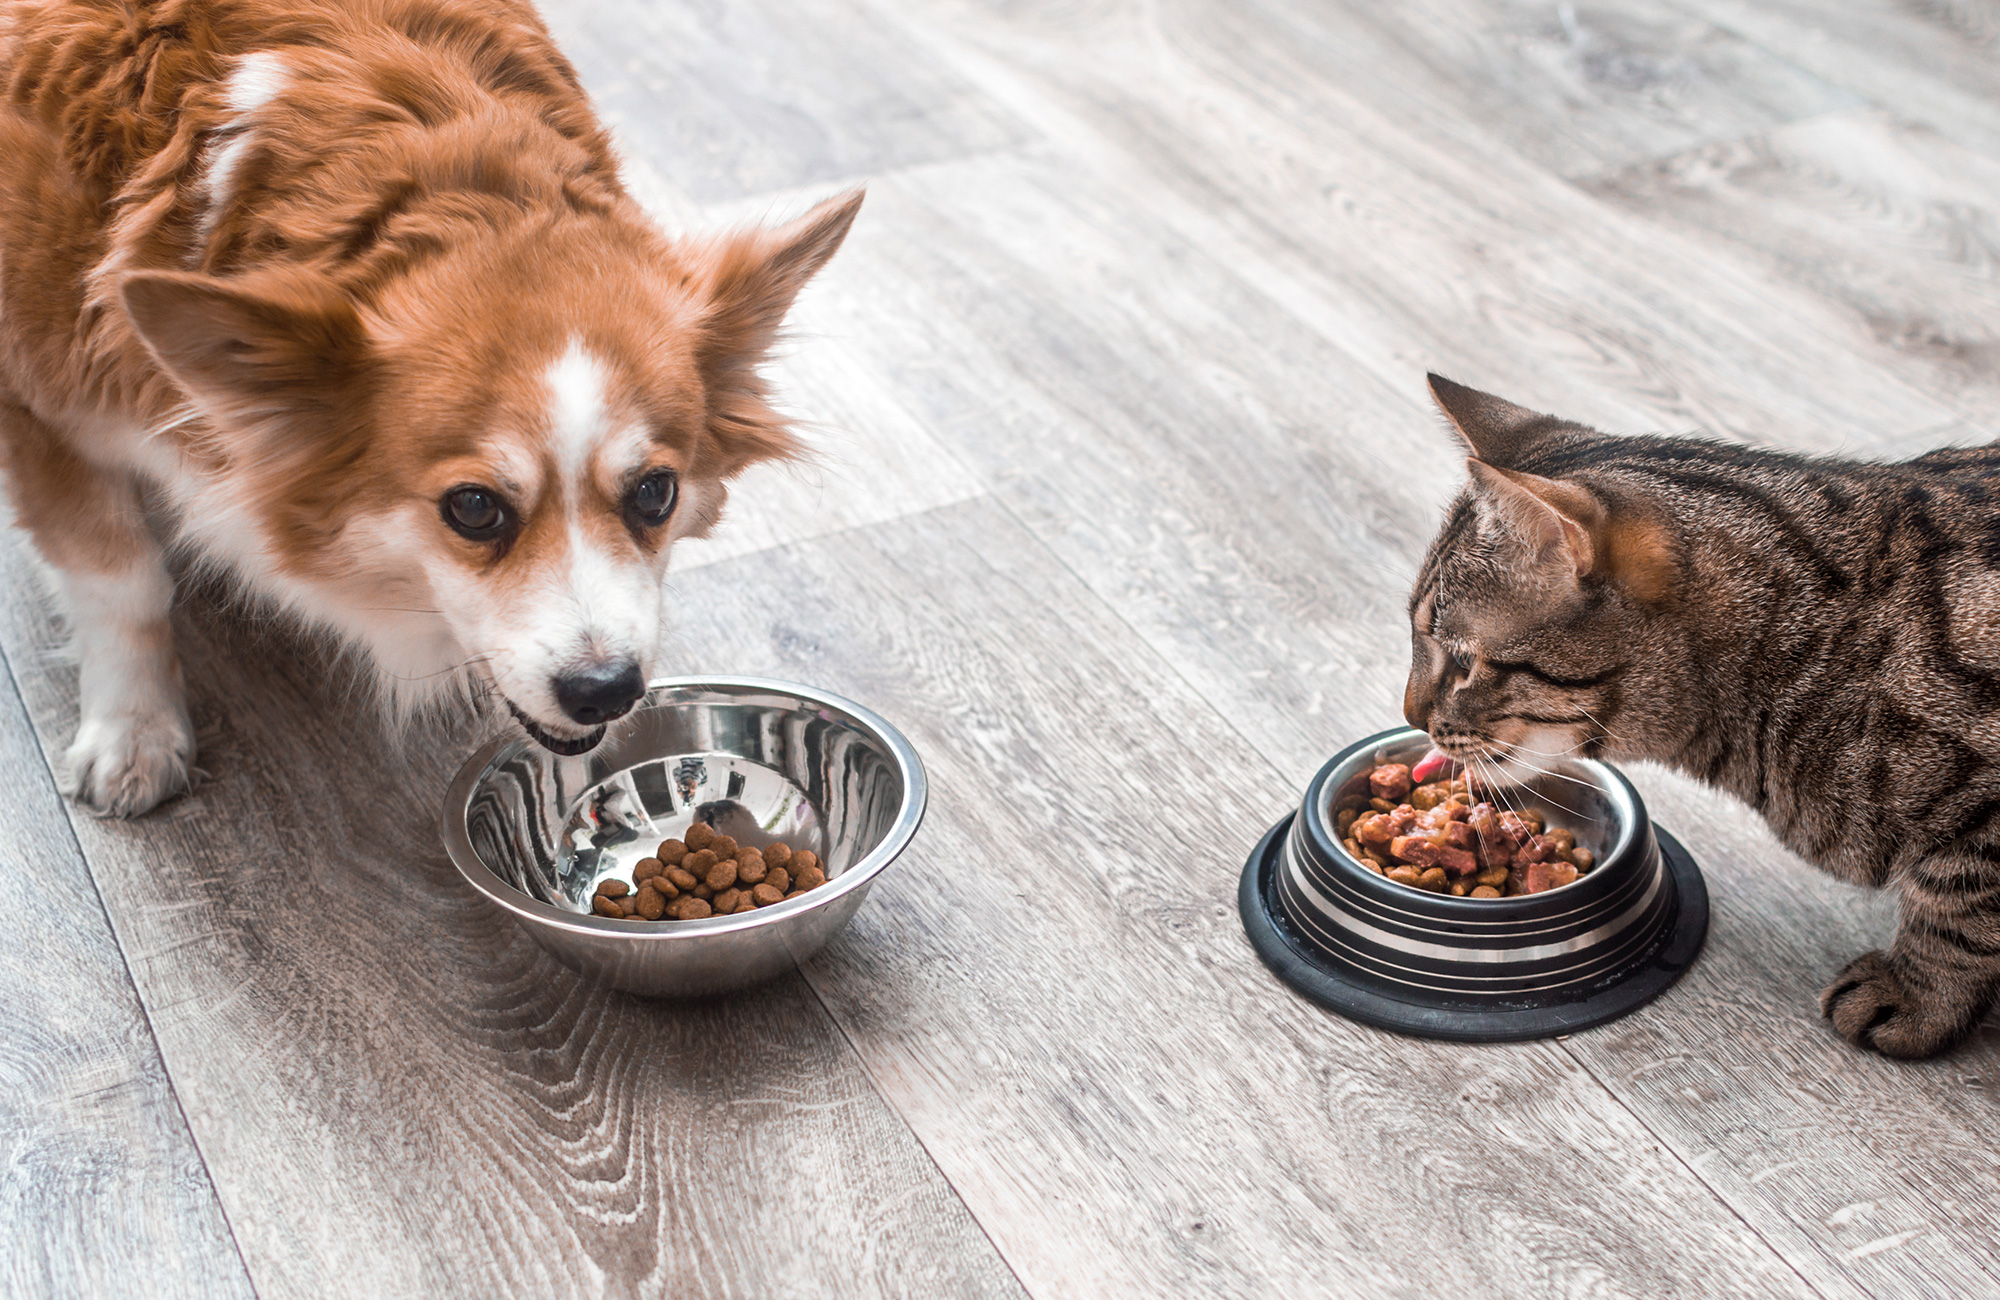 Will Cat Food Make a Dog Go Blind?